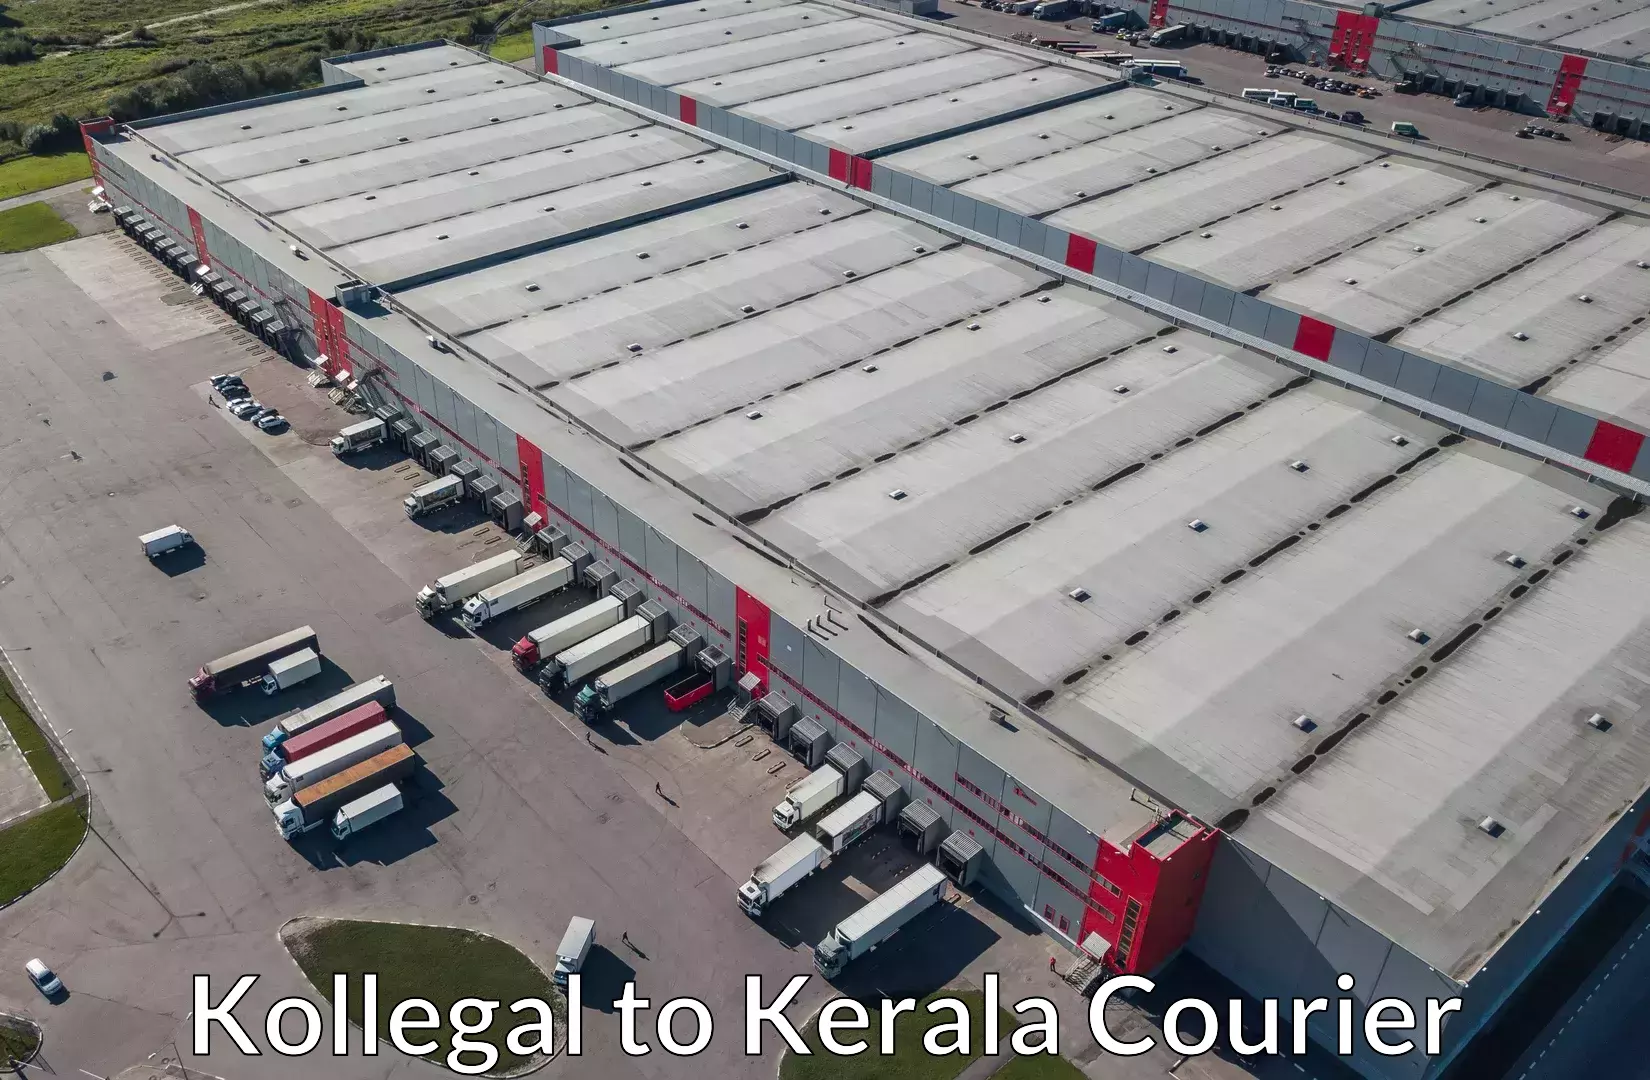 Luggage delivery network Kollegal to Kerala